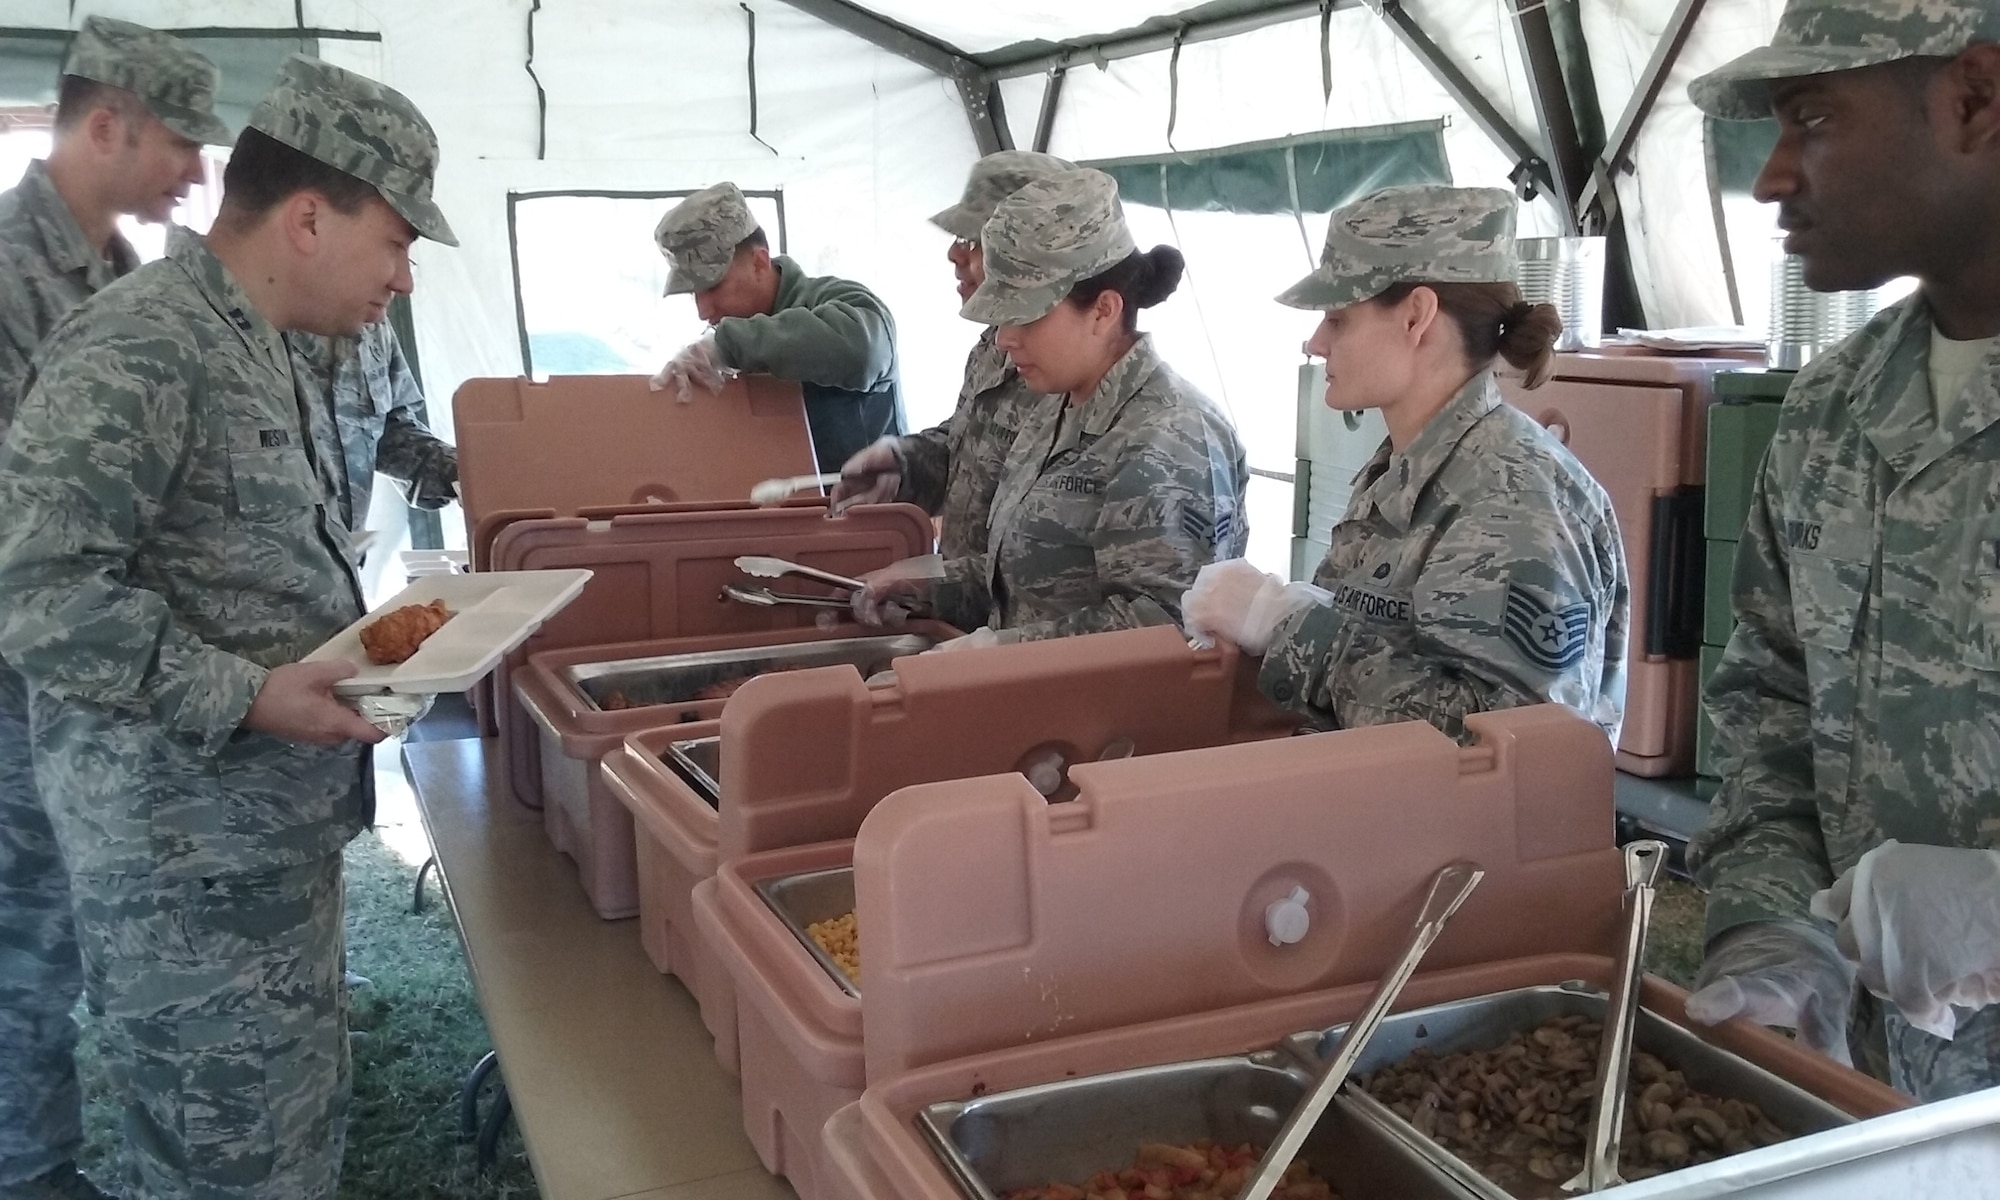 Airmen from the 507th Air Refueling Wing Force Support Squadron Services Sustainment Flight serve food to Ch. (Capt.) John Weston and Tech. Sgt. Patrick Garrison of 507th Air Refueling Wing Chapel Services during a field kitchen training exercise Nov. 7, 2015, at Tinker Air Force Base, Okla. The kitchen is designed to provide deployed personnel food at remote and undeveloped sites. (U.S. Air Force photo by Senior Airman Chelsea Thomas) 